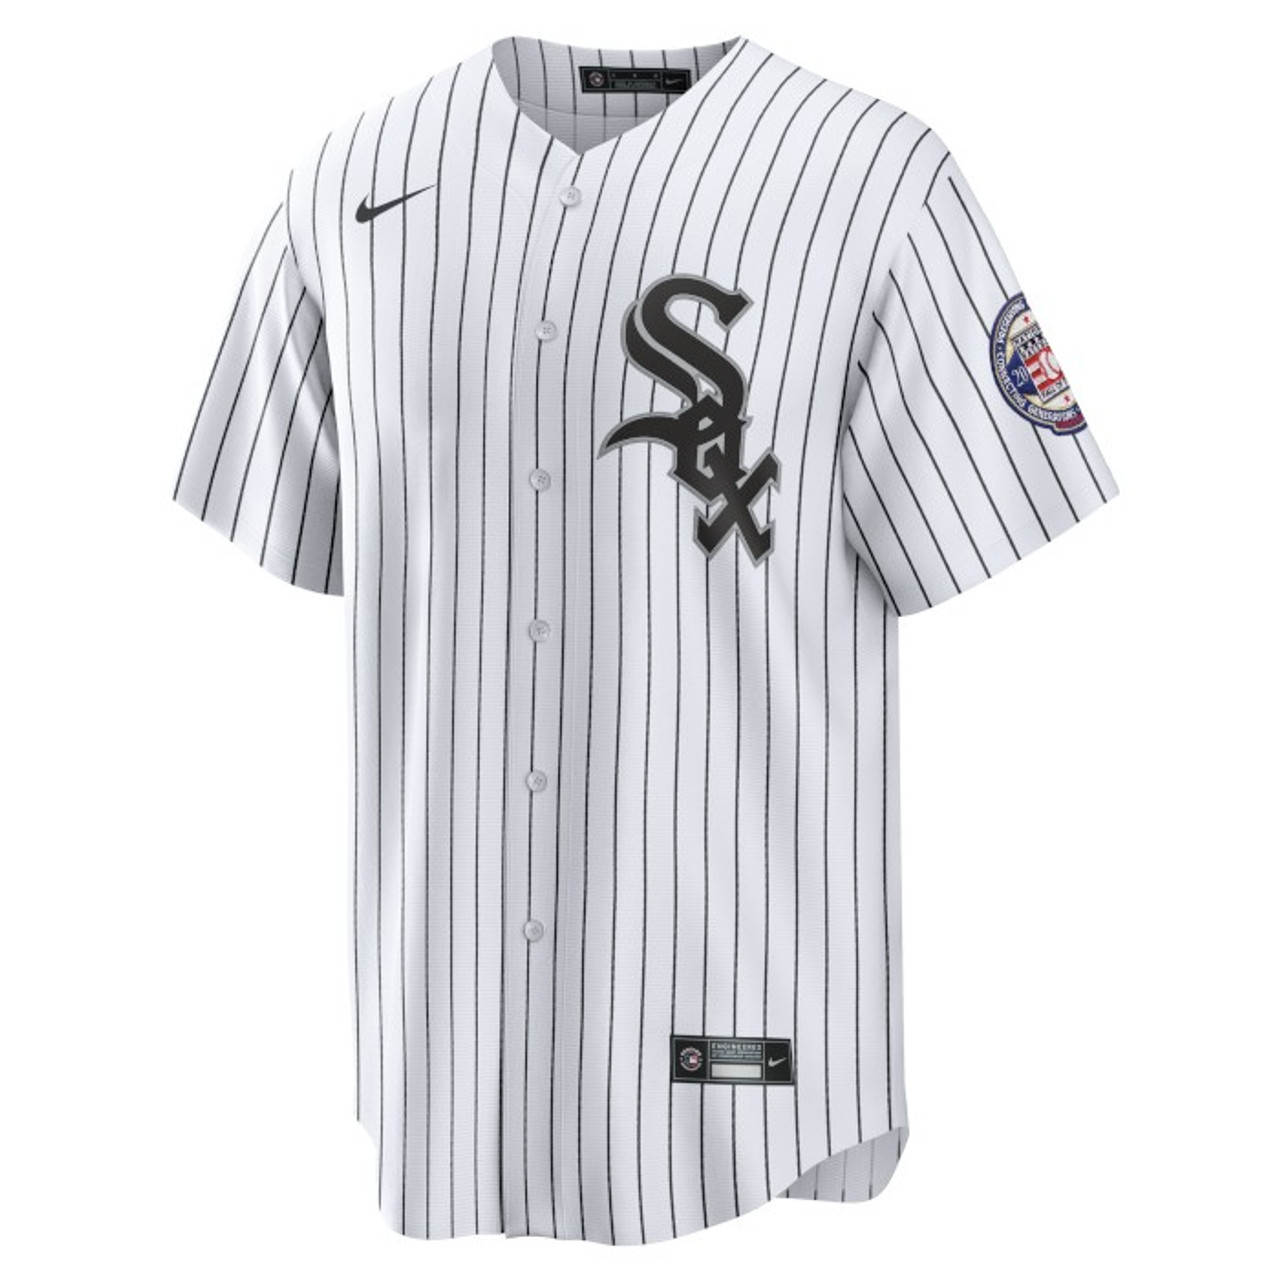 los white sox soccer jersey 2022